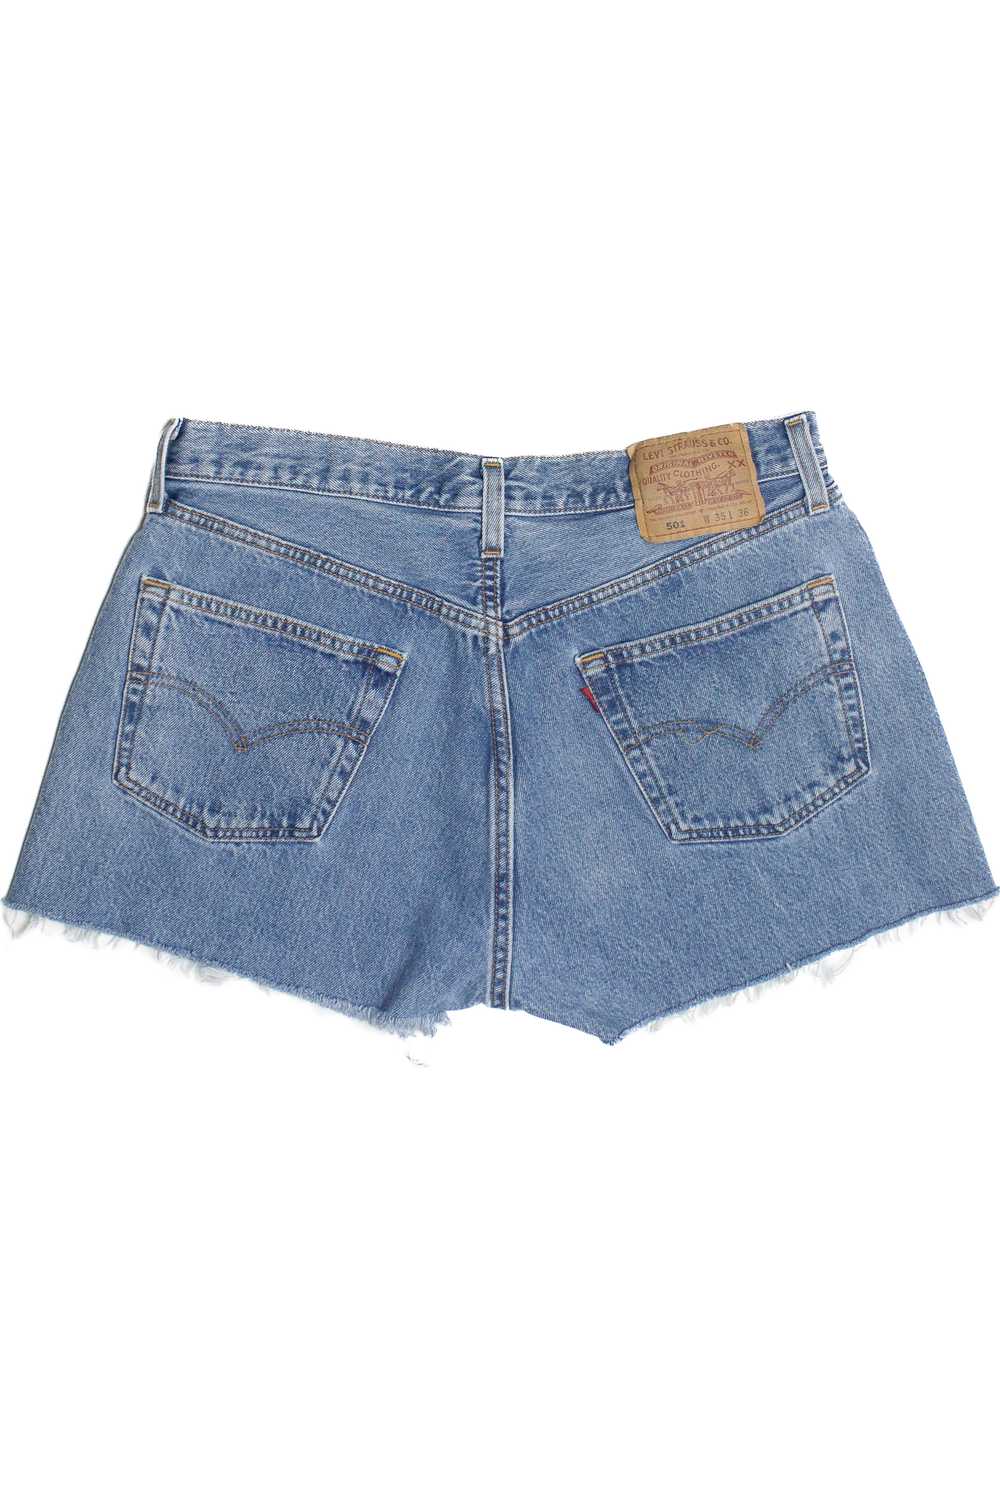 Vintage Levi's 501 High Waisted Cut Off Shorts 14… - image 3